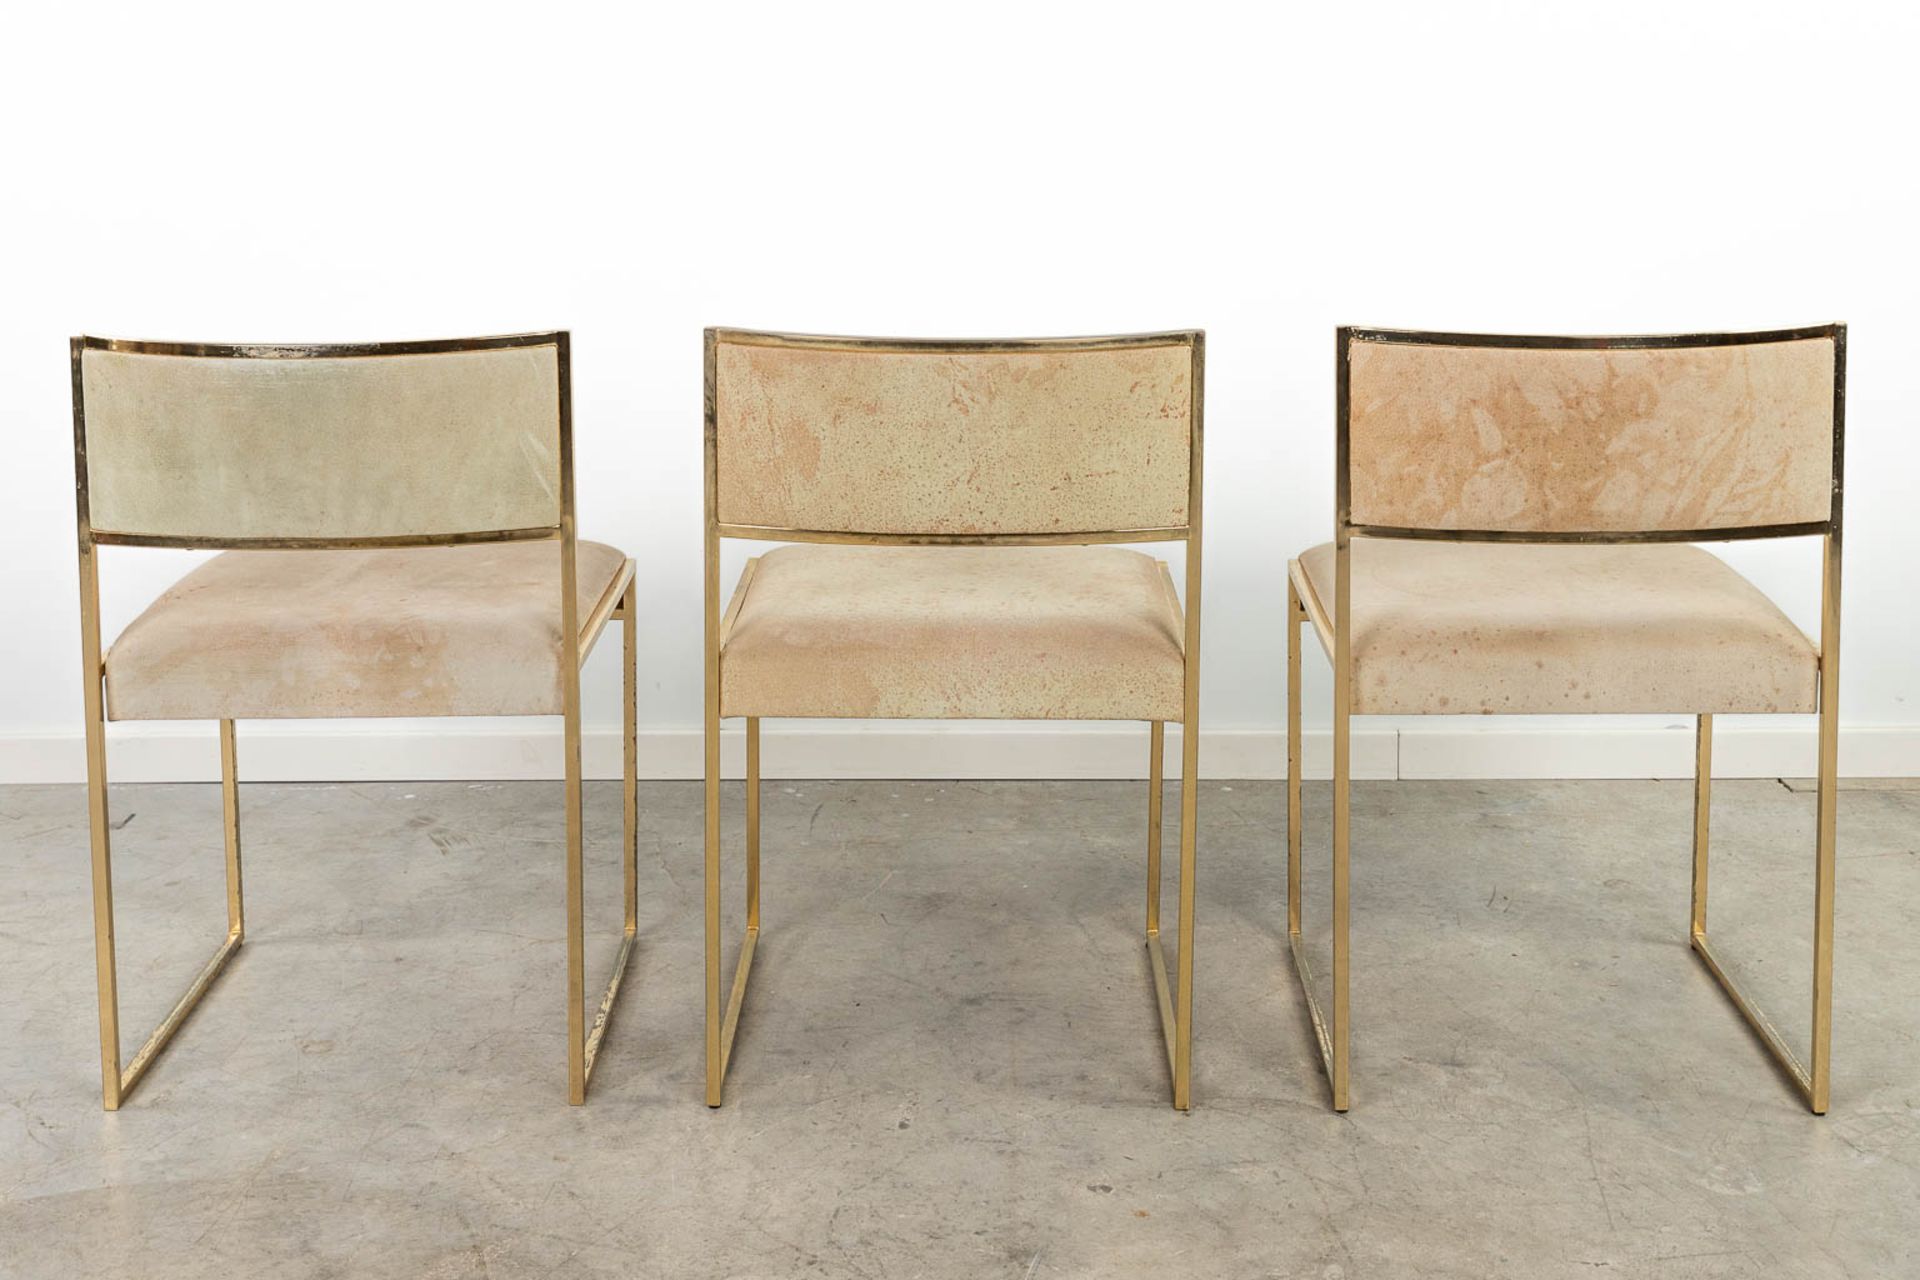 Willy RIZZO (1928-2013)ÊSet of 3 chairs, made of gold plated brass. Circa 1970. (49 x 48 x 78cm) - Image 10 of 14